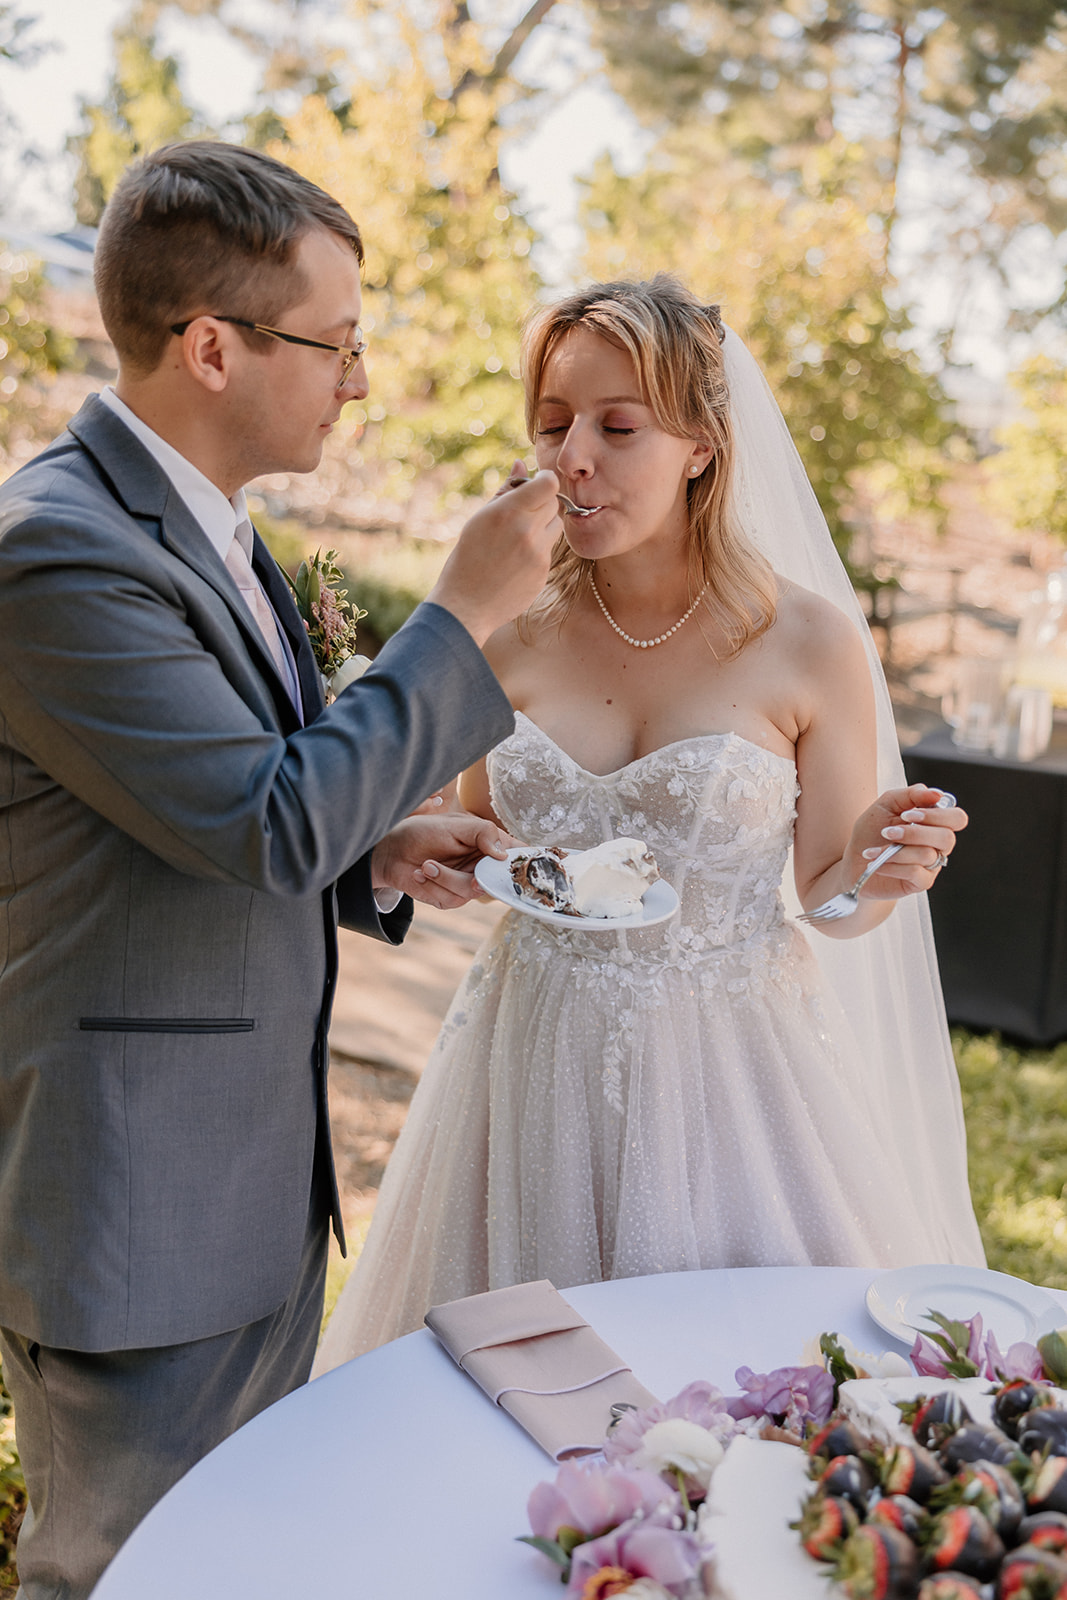 A groom in a gray suit is feeding cake to a bride in a white wedding dress and veil. They are standing outdoors near a table with flowers and cake.